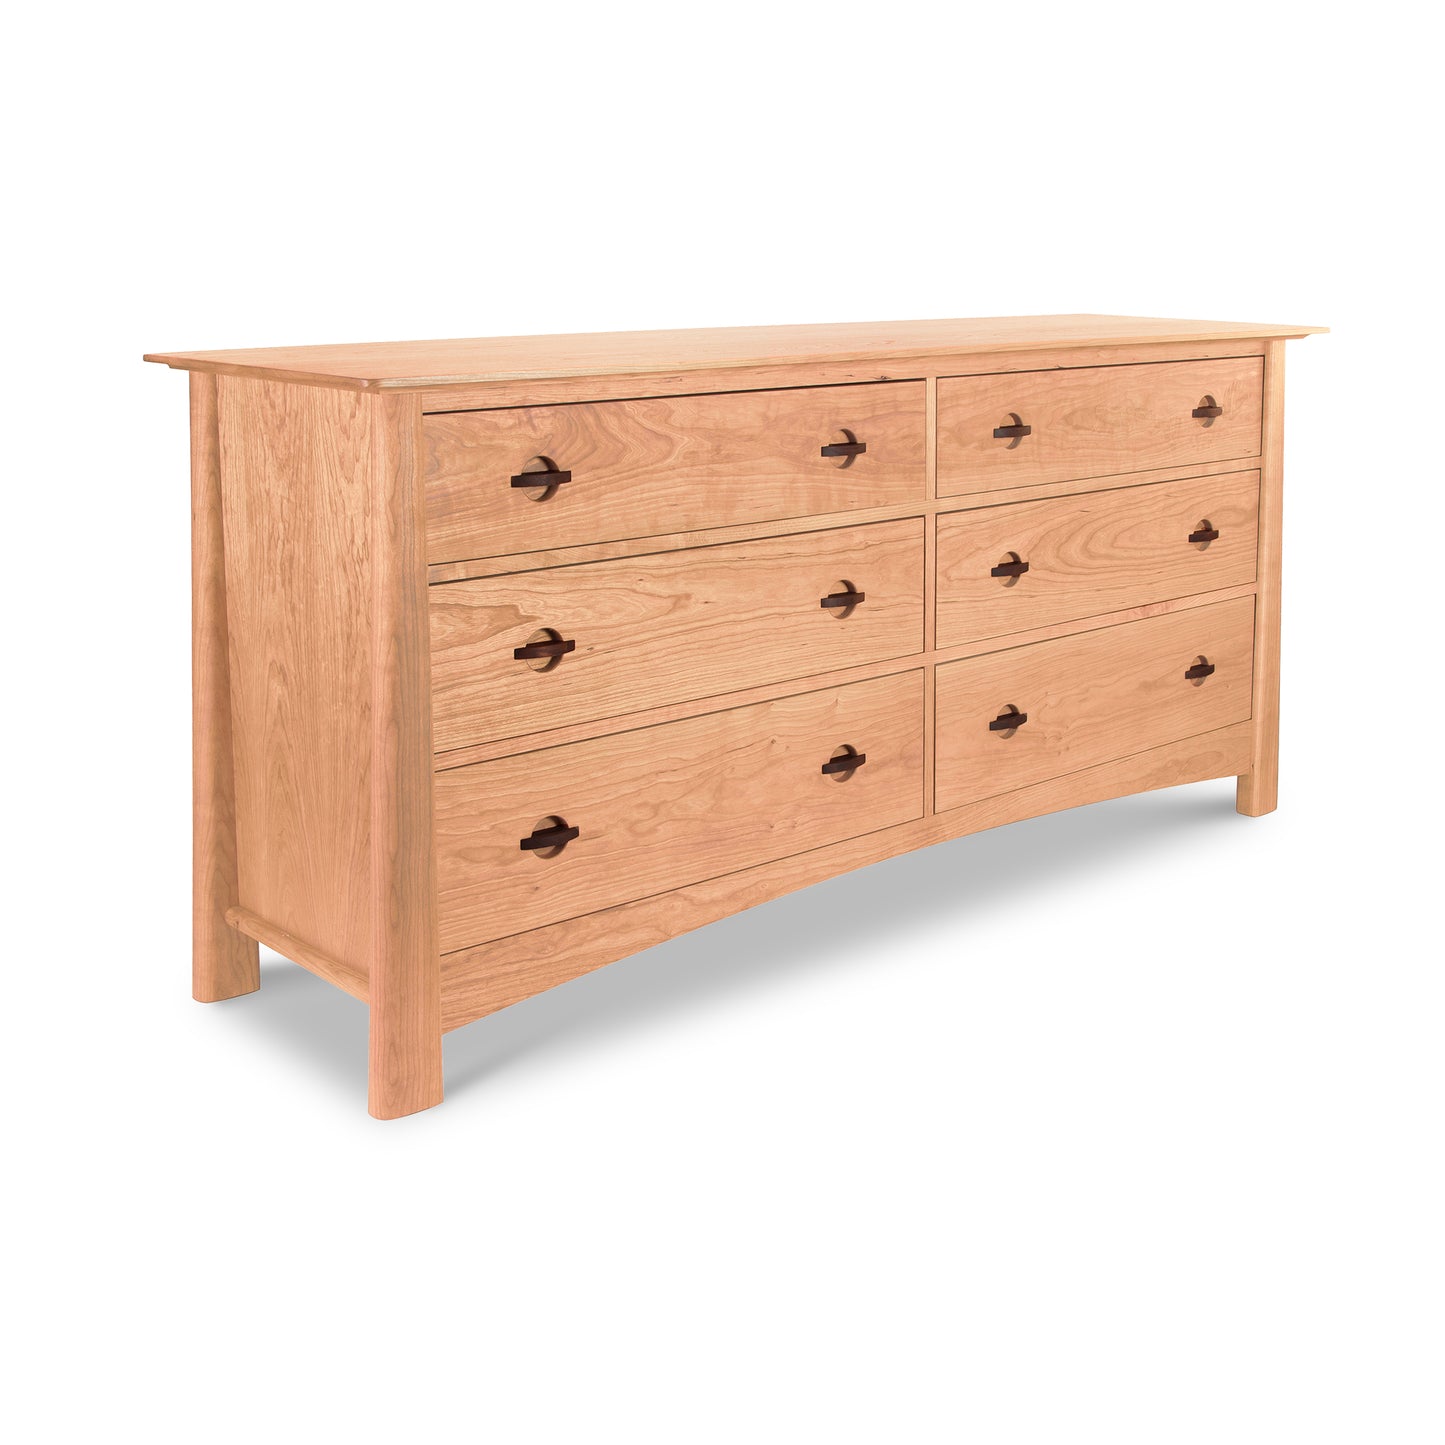 A Cherry Moon 6-Drawer Dresser from Maple Corner Woodworks with nine drawers and black metal handles, isolated on a white background. The dresser has a simple, elongated design with a natural wood finish.